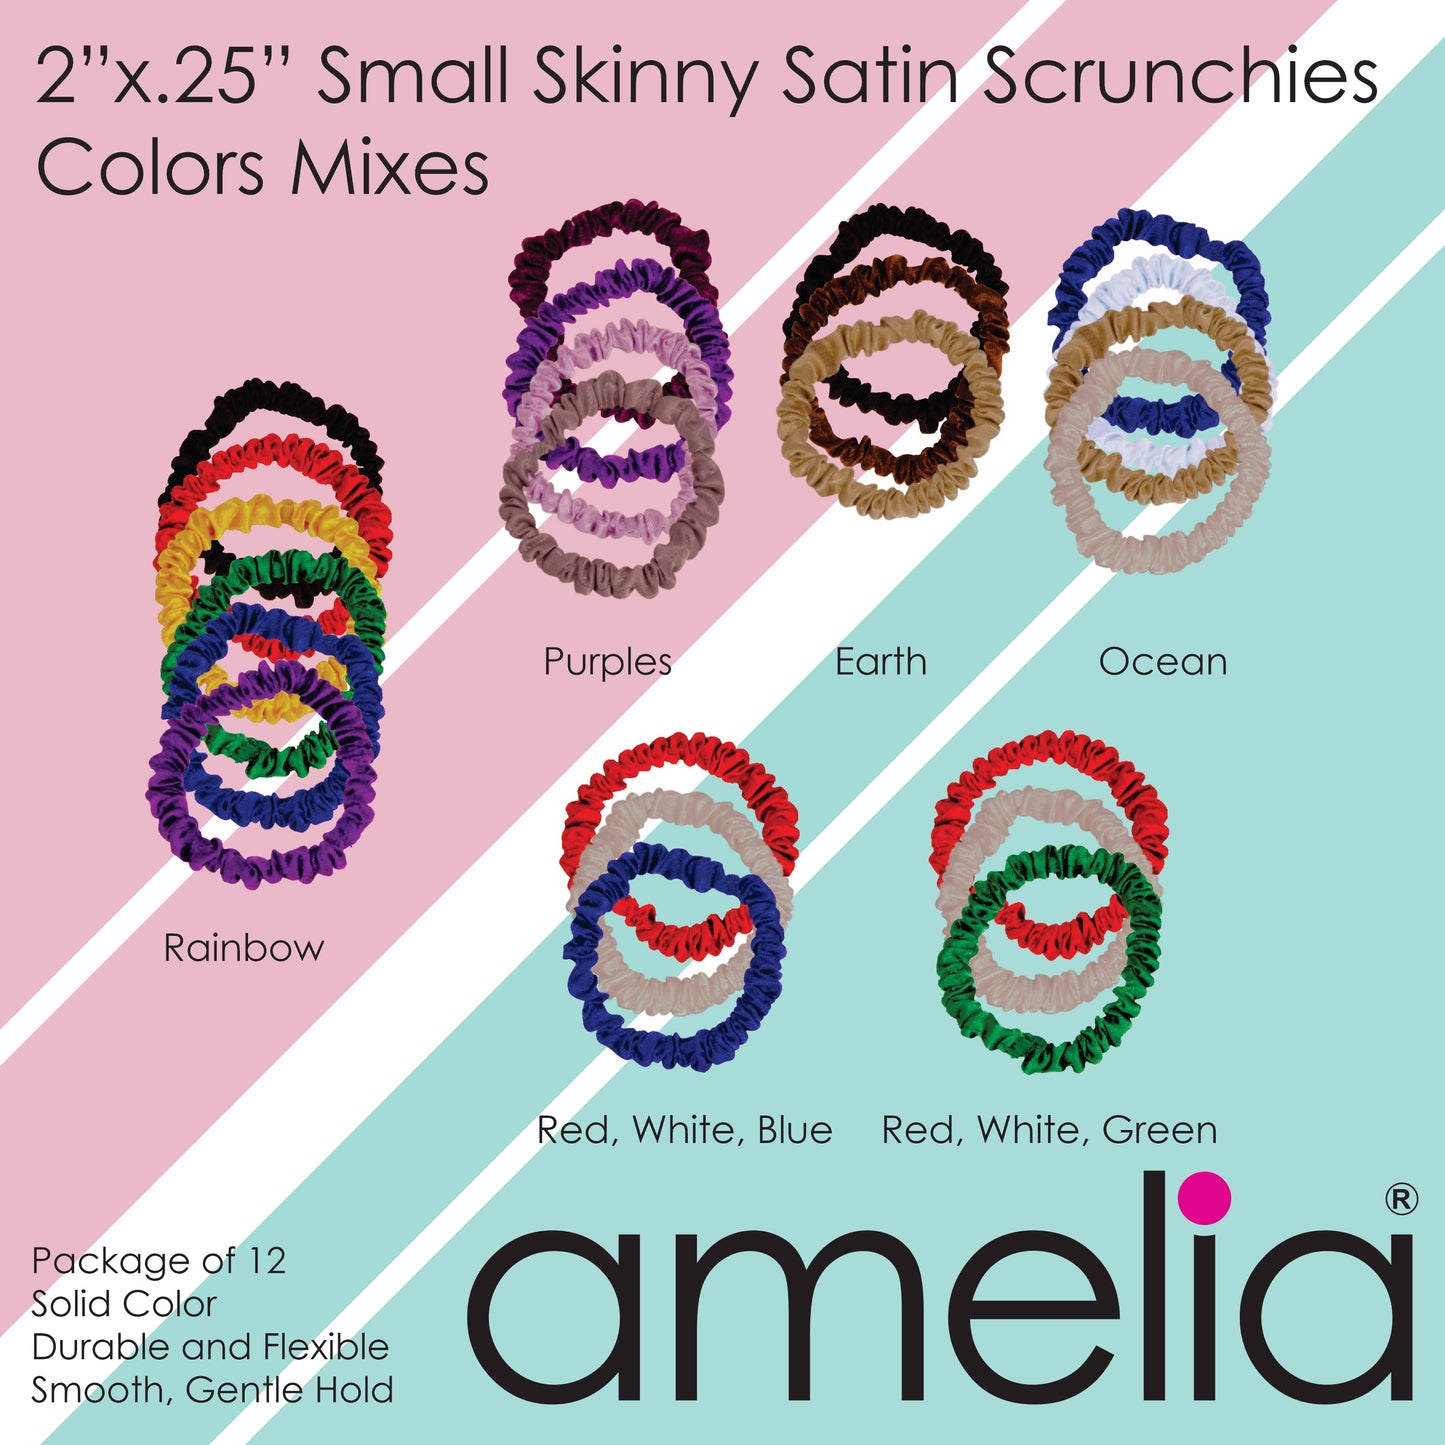 Amelia Beauty, Red Skinny Satin Scrunchies, 2in Diameter, Gentle and Strong Hold, No Snag, No Dents or Creases. 12 Pack